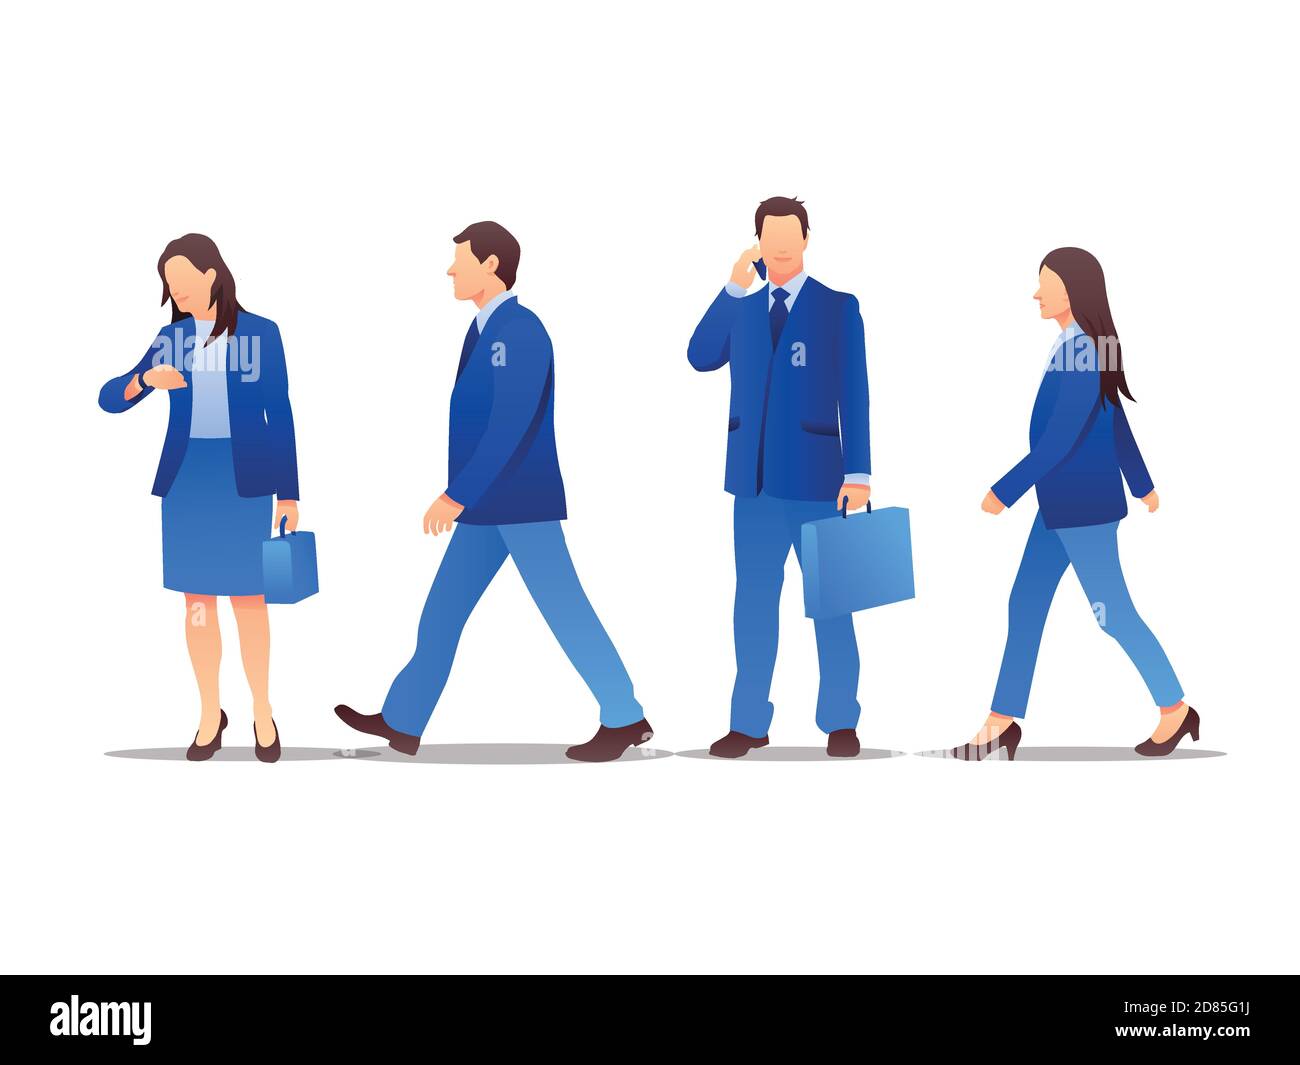 Vector set of walking and standing business characters. International business team. Simple flat design in blue colors. Stock Vector